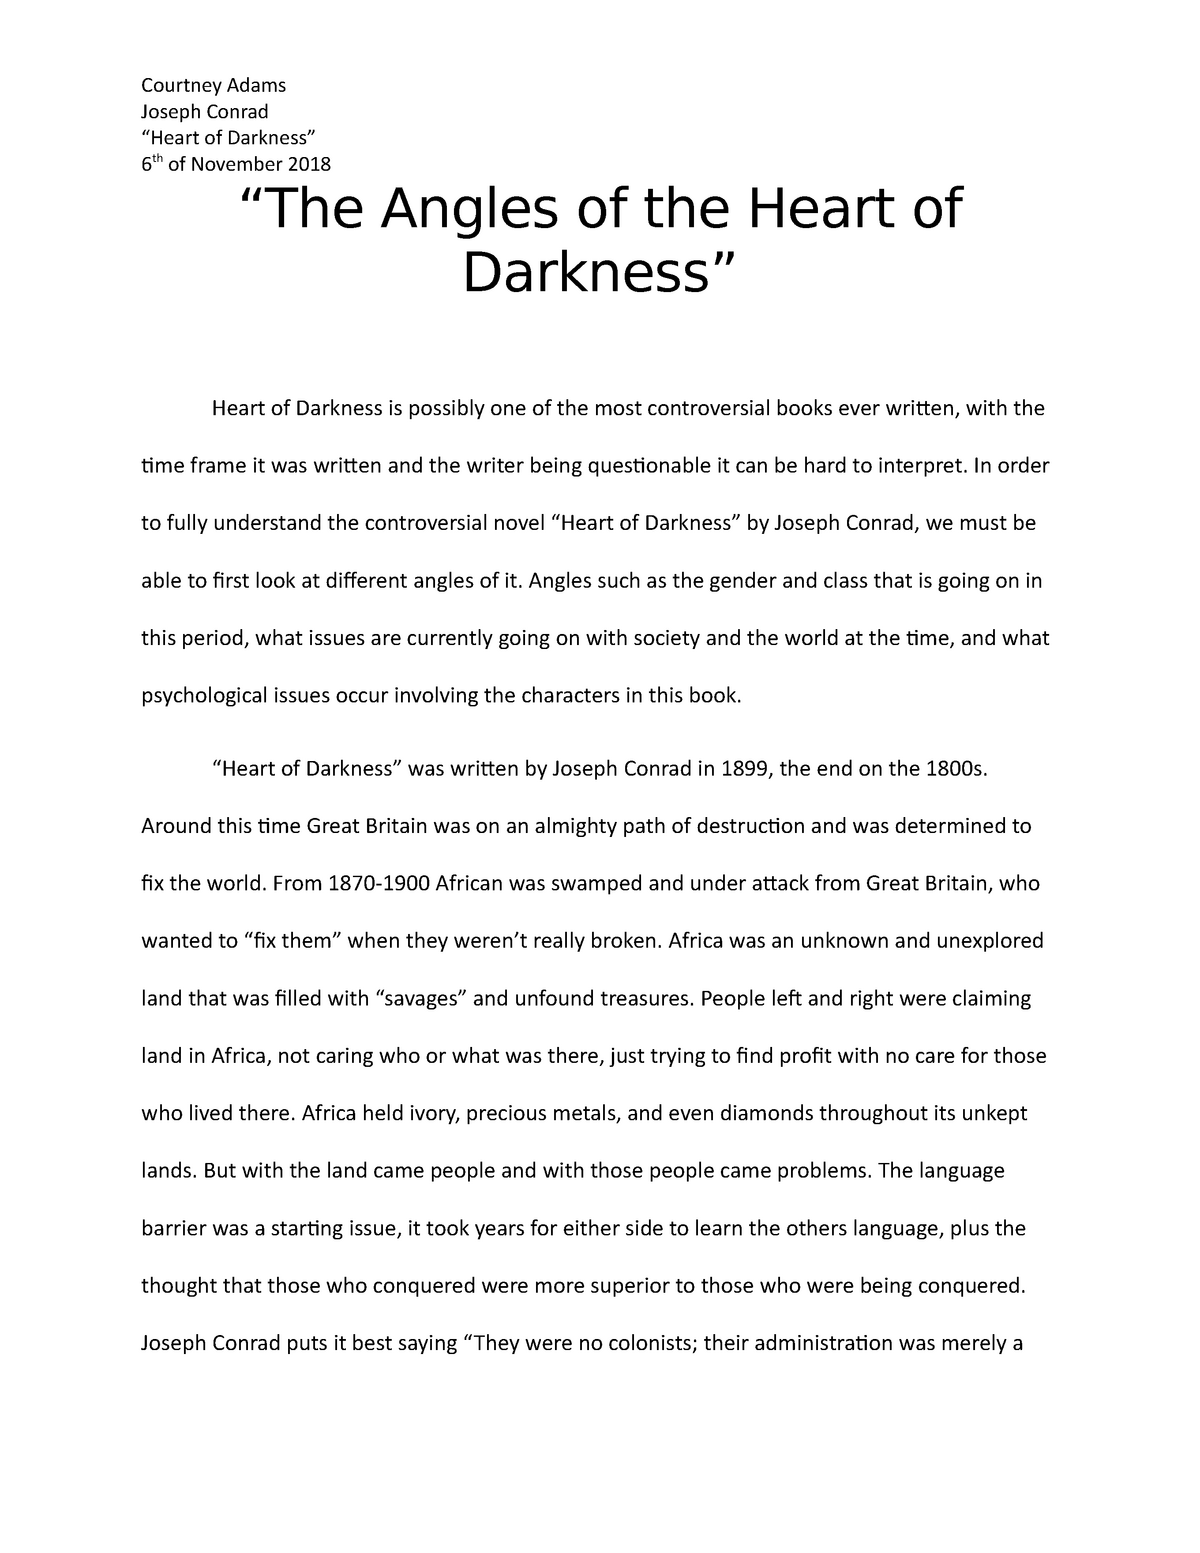 thesis on heart of darkness